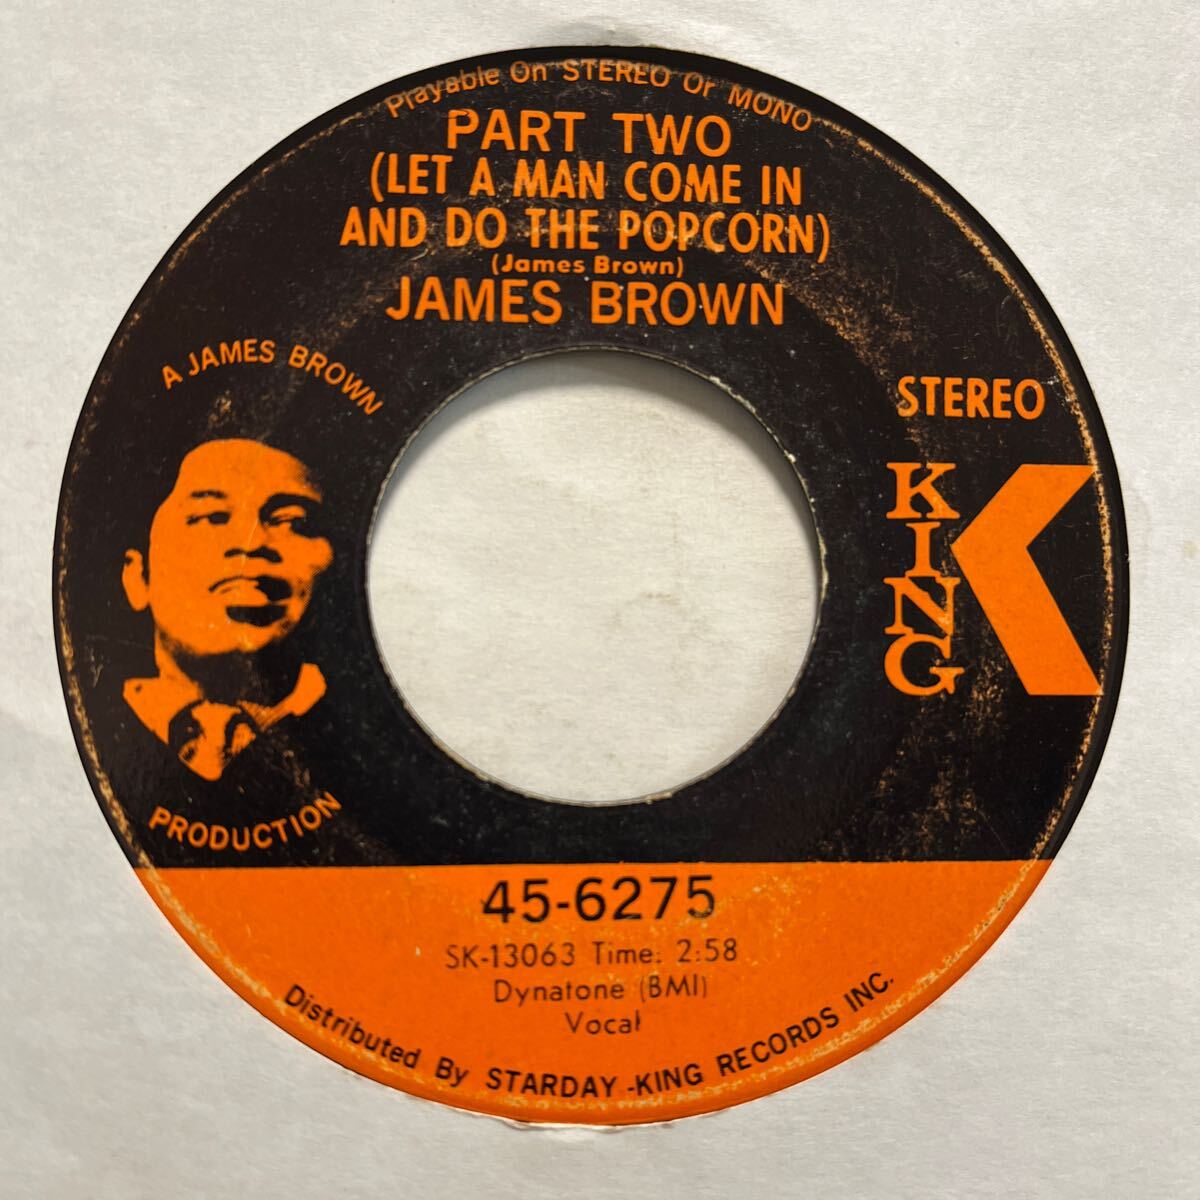 US盤 7インチ JAMES BROWN # PART TWO (LET A MAN COME IN AND DO THE POPCORN) / GITTIN' A LITTLE HIPPER (PART 2)の画像1